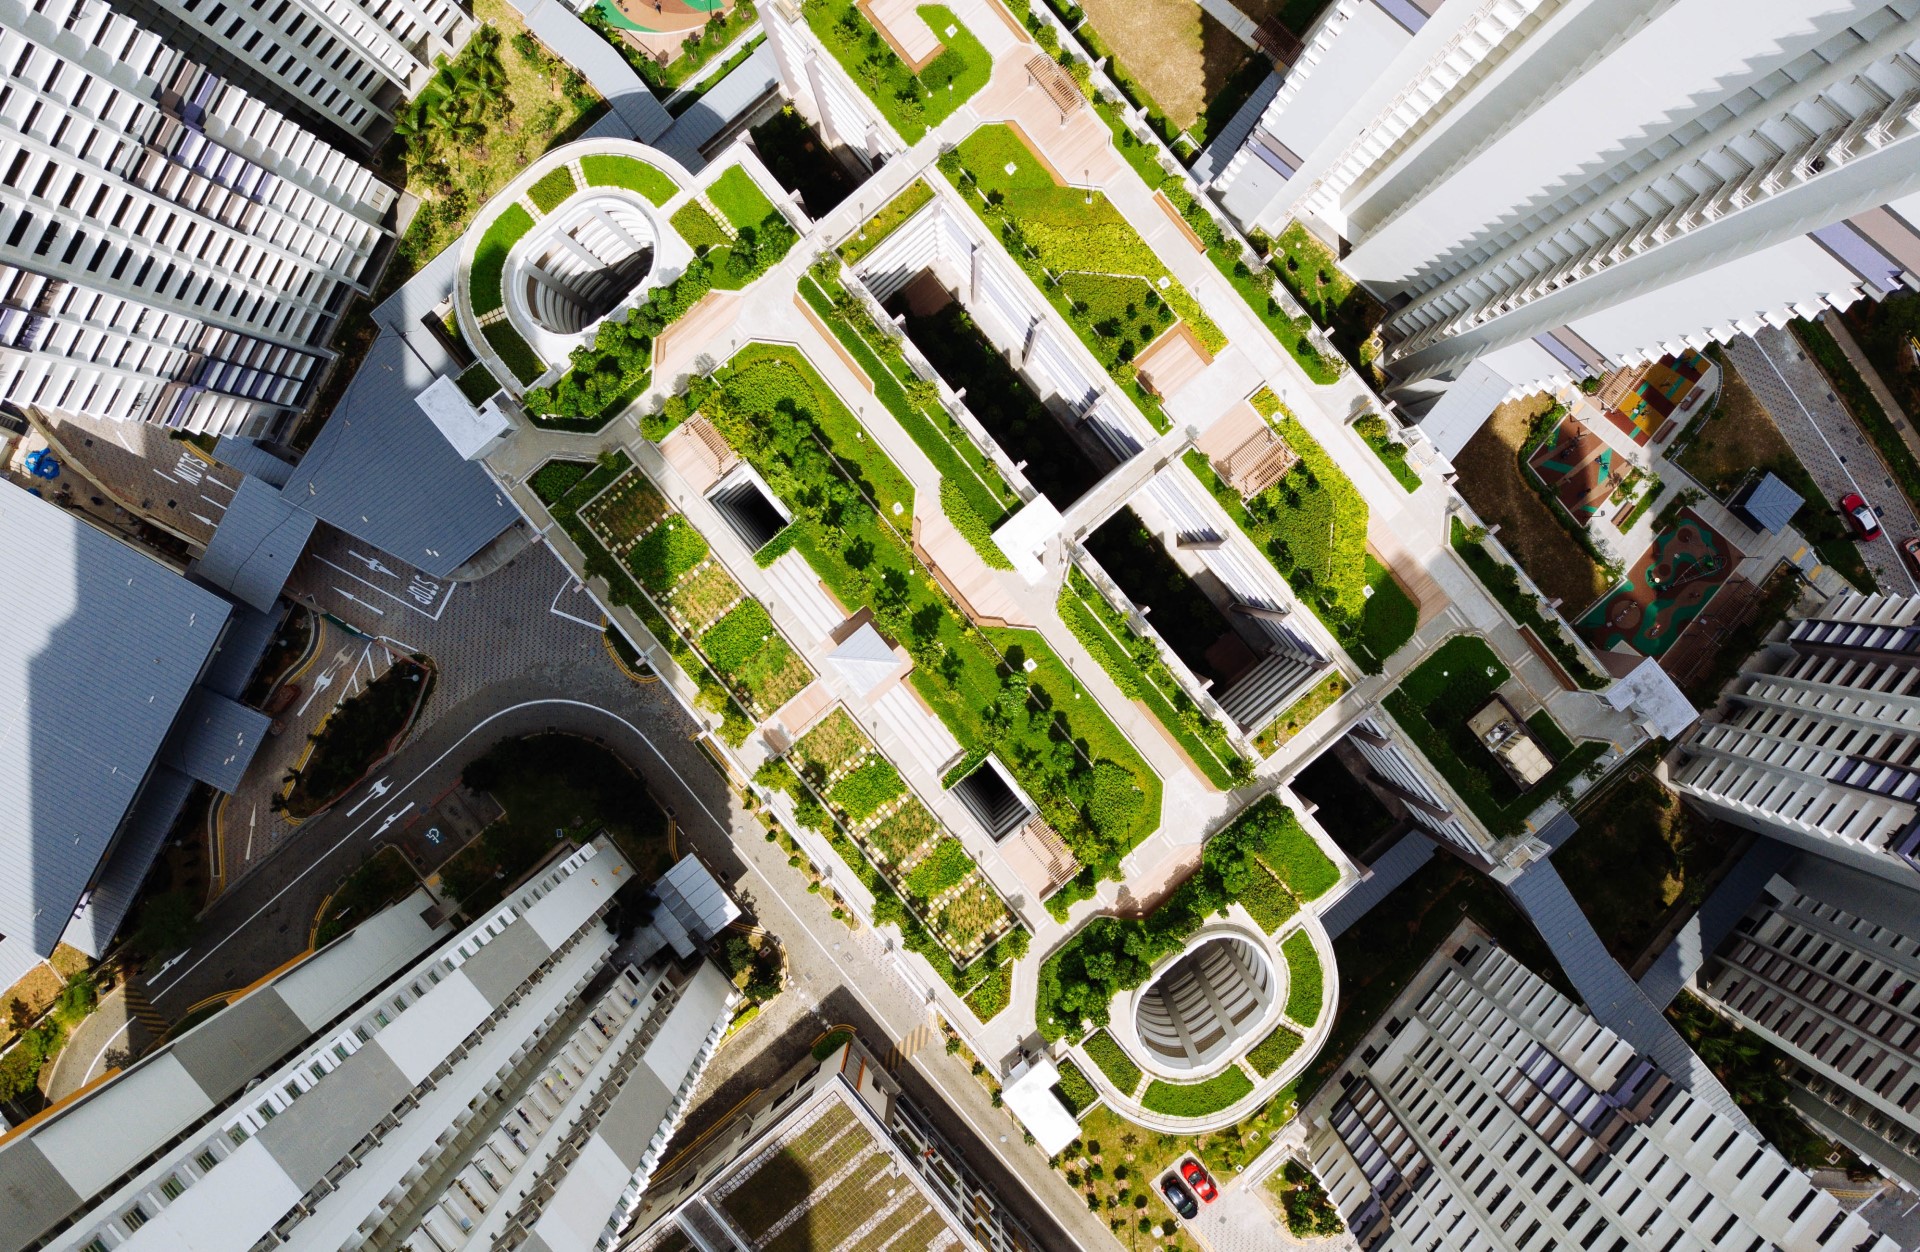 Why Green Roofs? Growing + Healing Green Systems (Infographic)